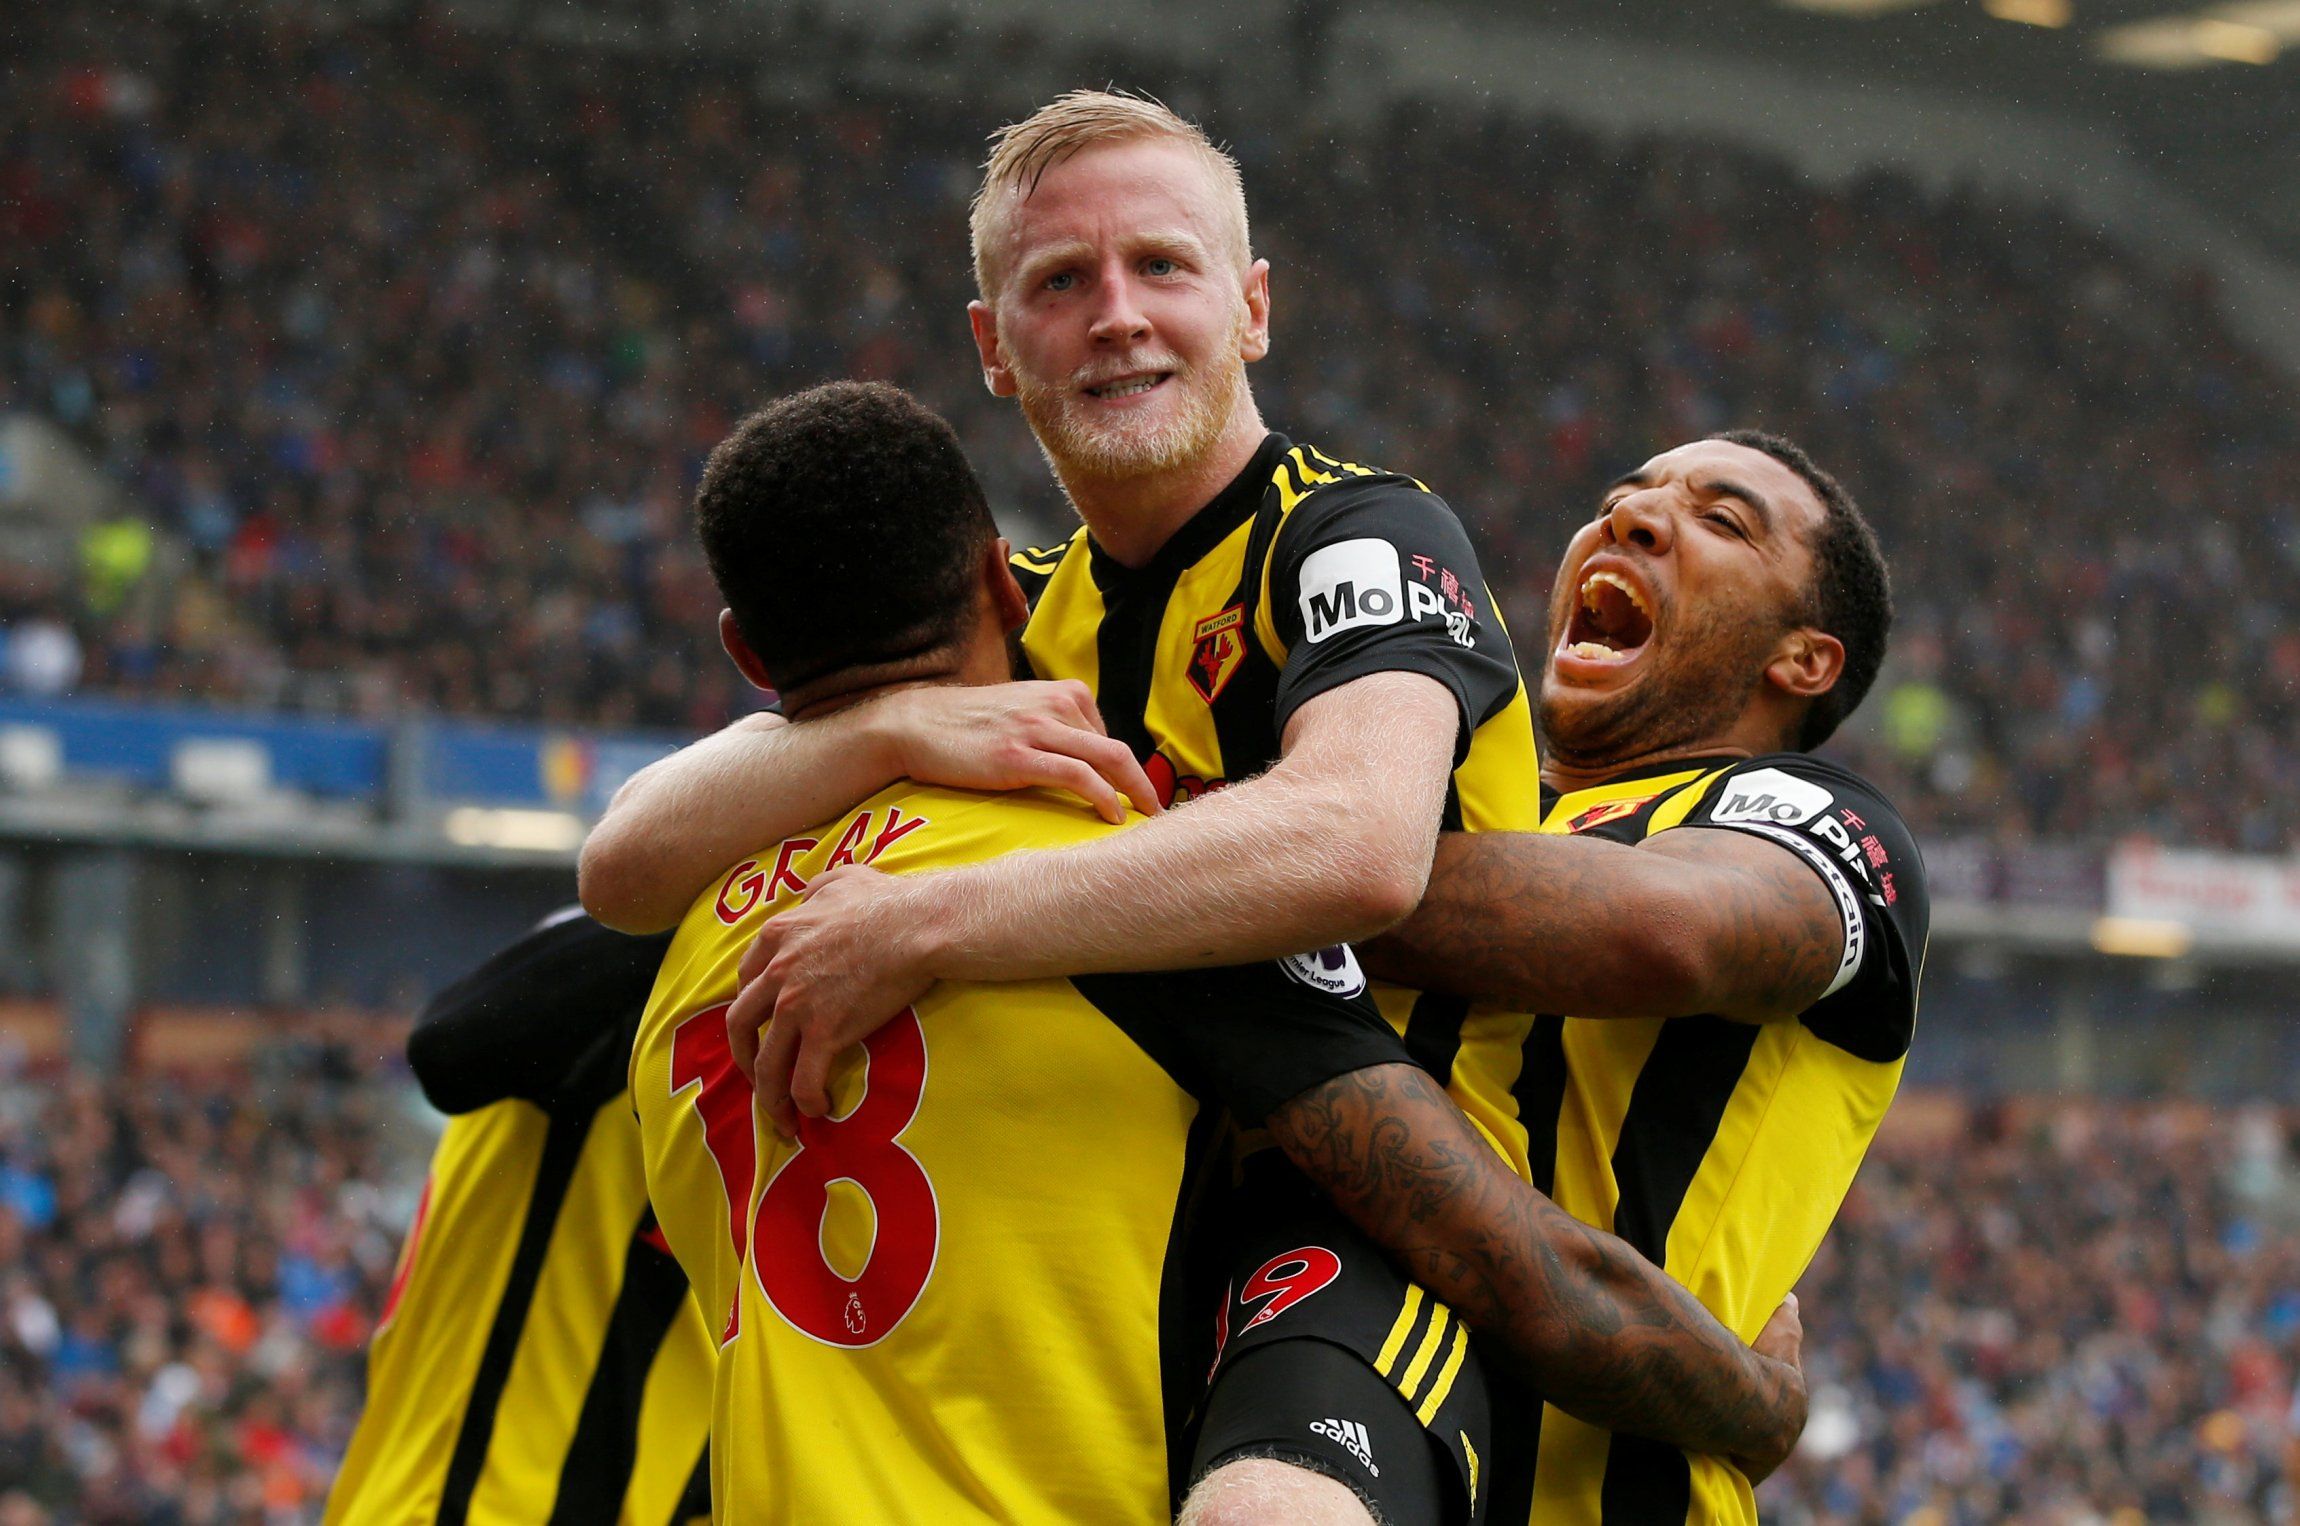 Watford players celebrate goal against Burnley in the Premier League